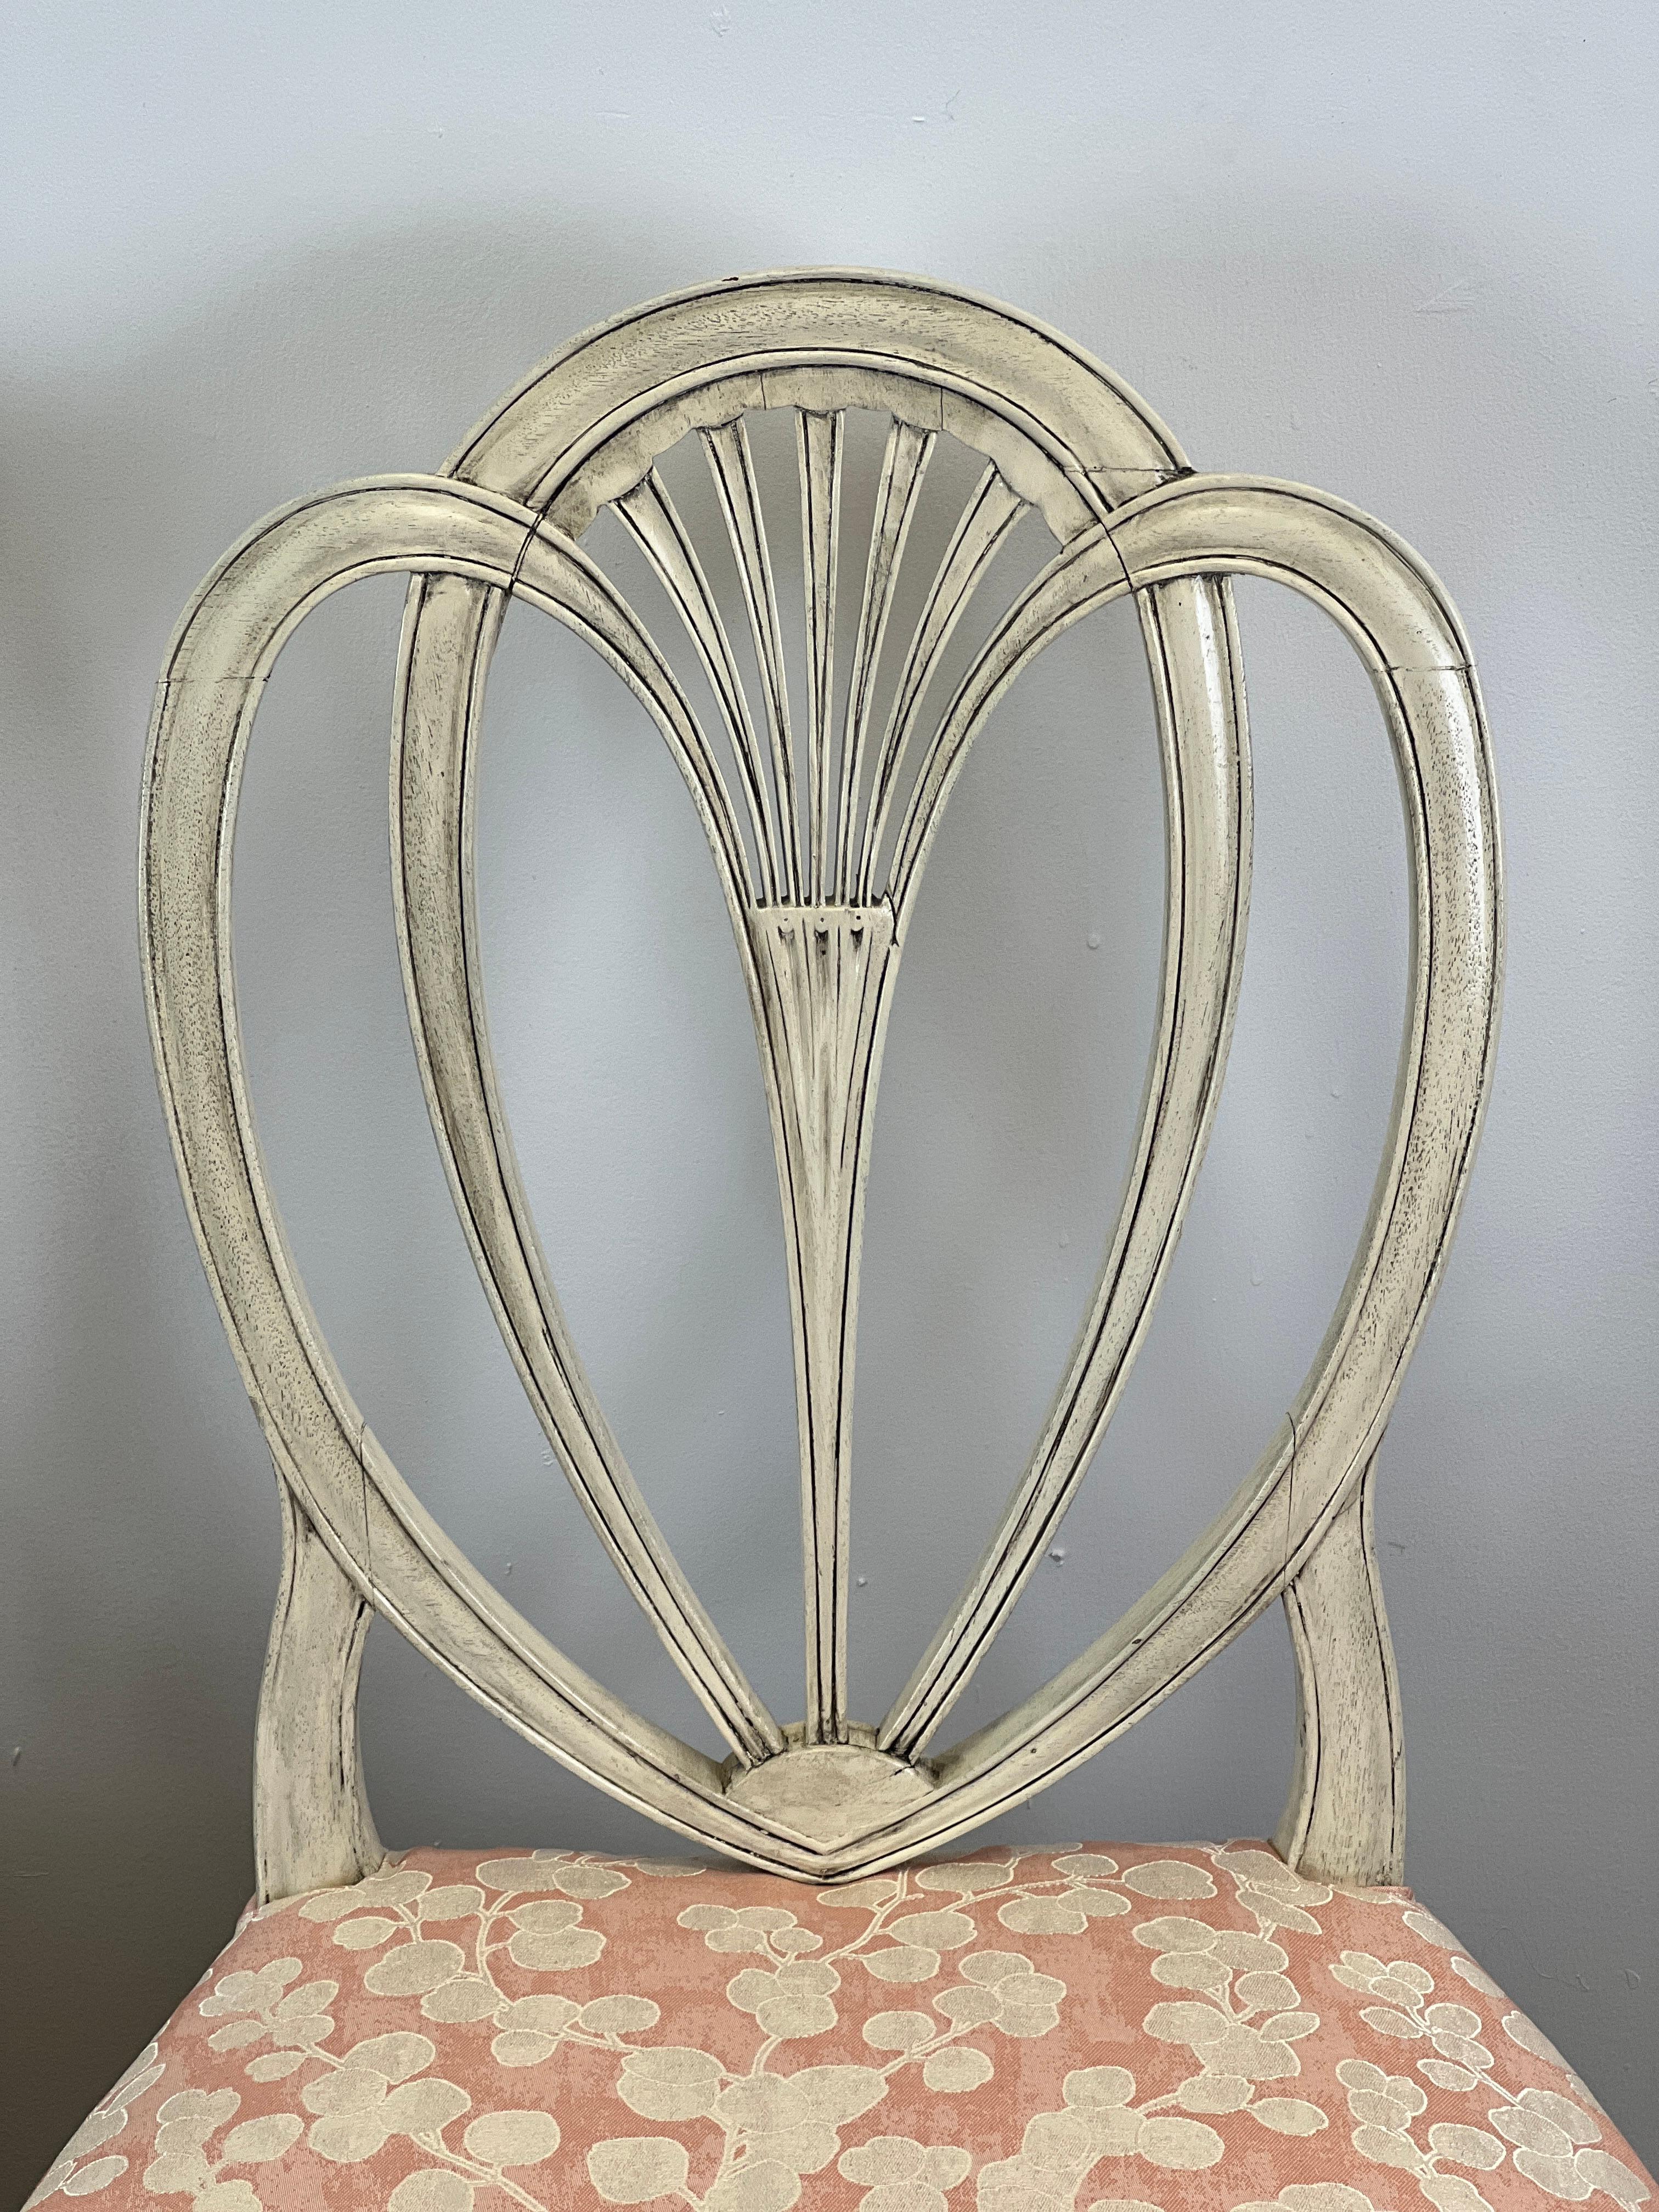 Mahogany Pair of 18th Century American Mid-Atlantic Hepplewhite Arched Back Side Chairs For Sale